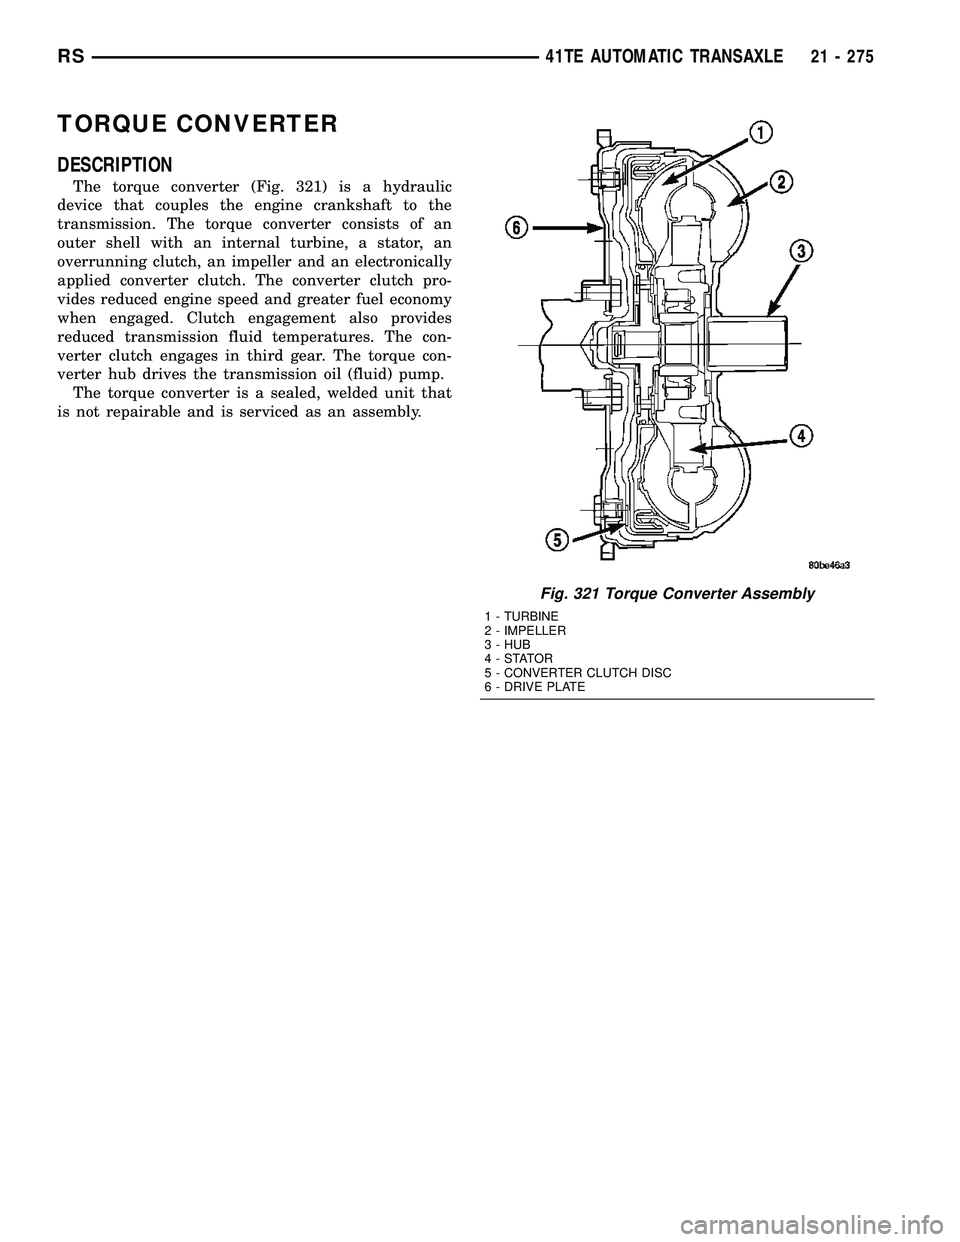 CHRYSLER VOYAGER 2005  Service Manual TORQUE CONVERTER
DESCRIPTION
The torque converter (Fig. 321) is a hydraulic
device that couples the engine crankshaft to the
transmission. The torque converter consists of an
outer shell with an inter